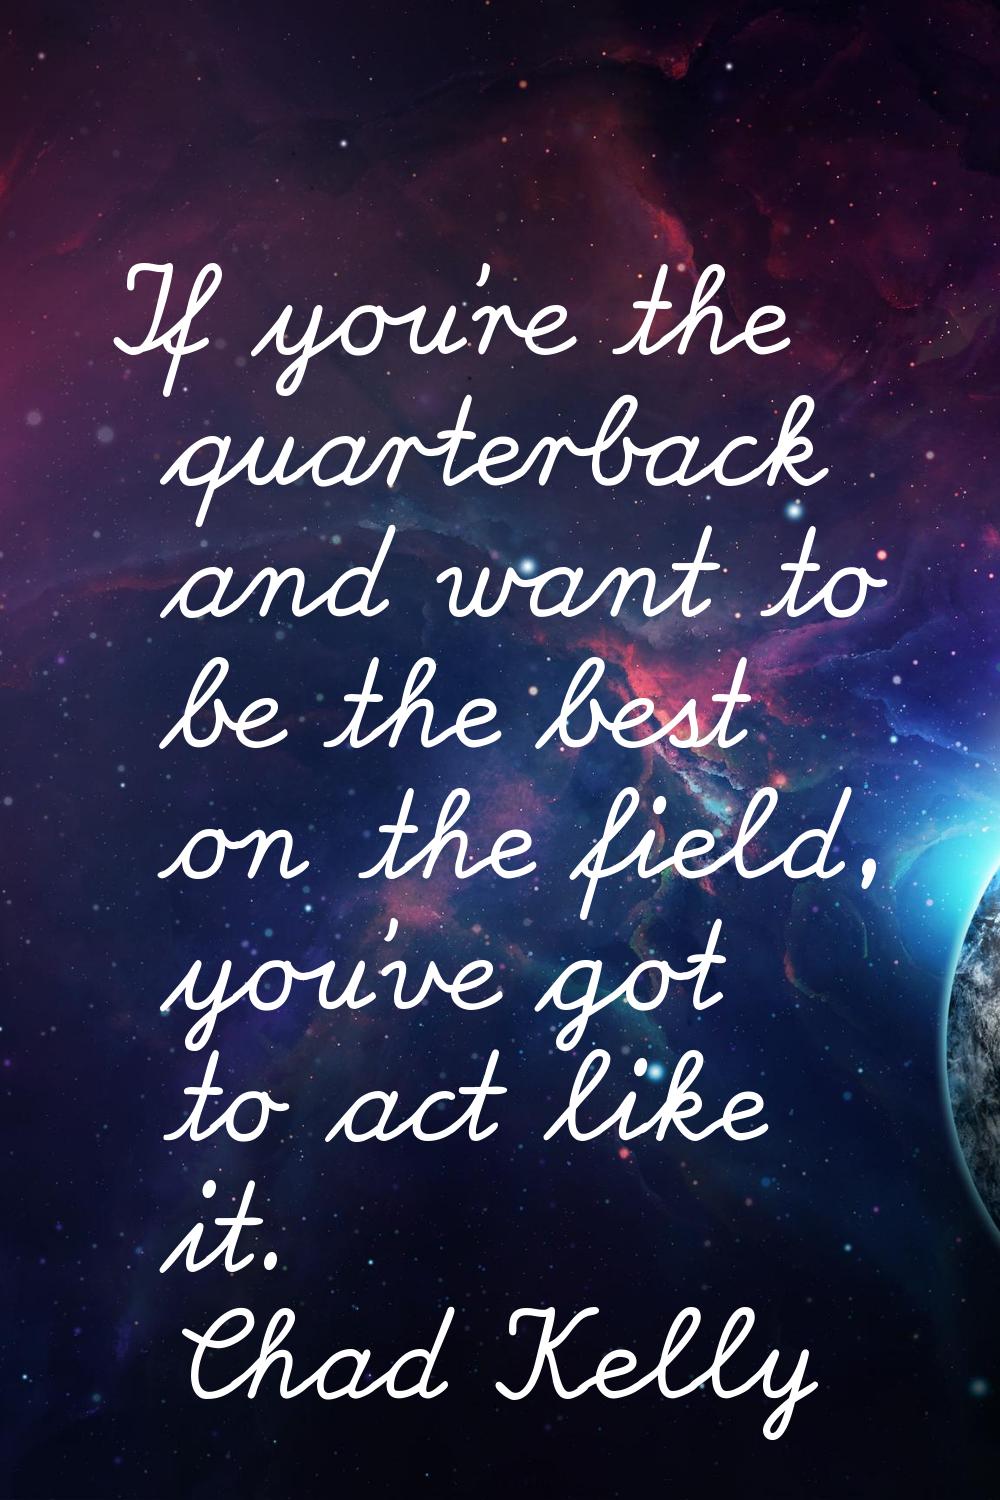 If you're the quarterback and want to be the best on the field, you've got to act like it.